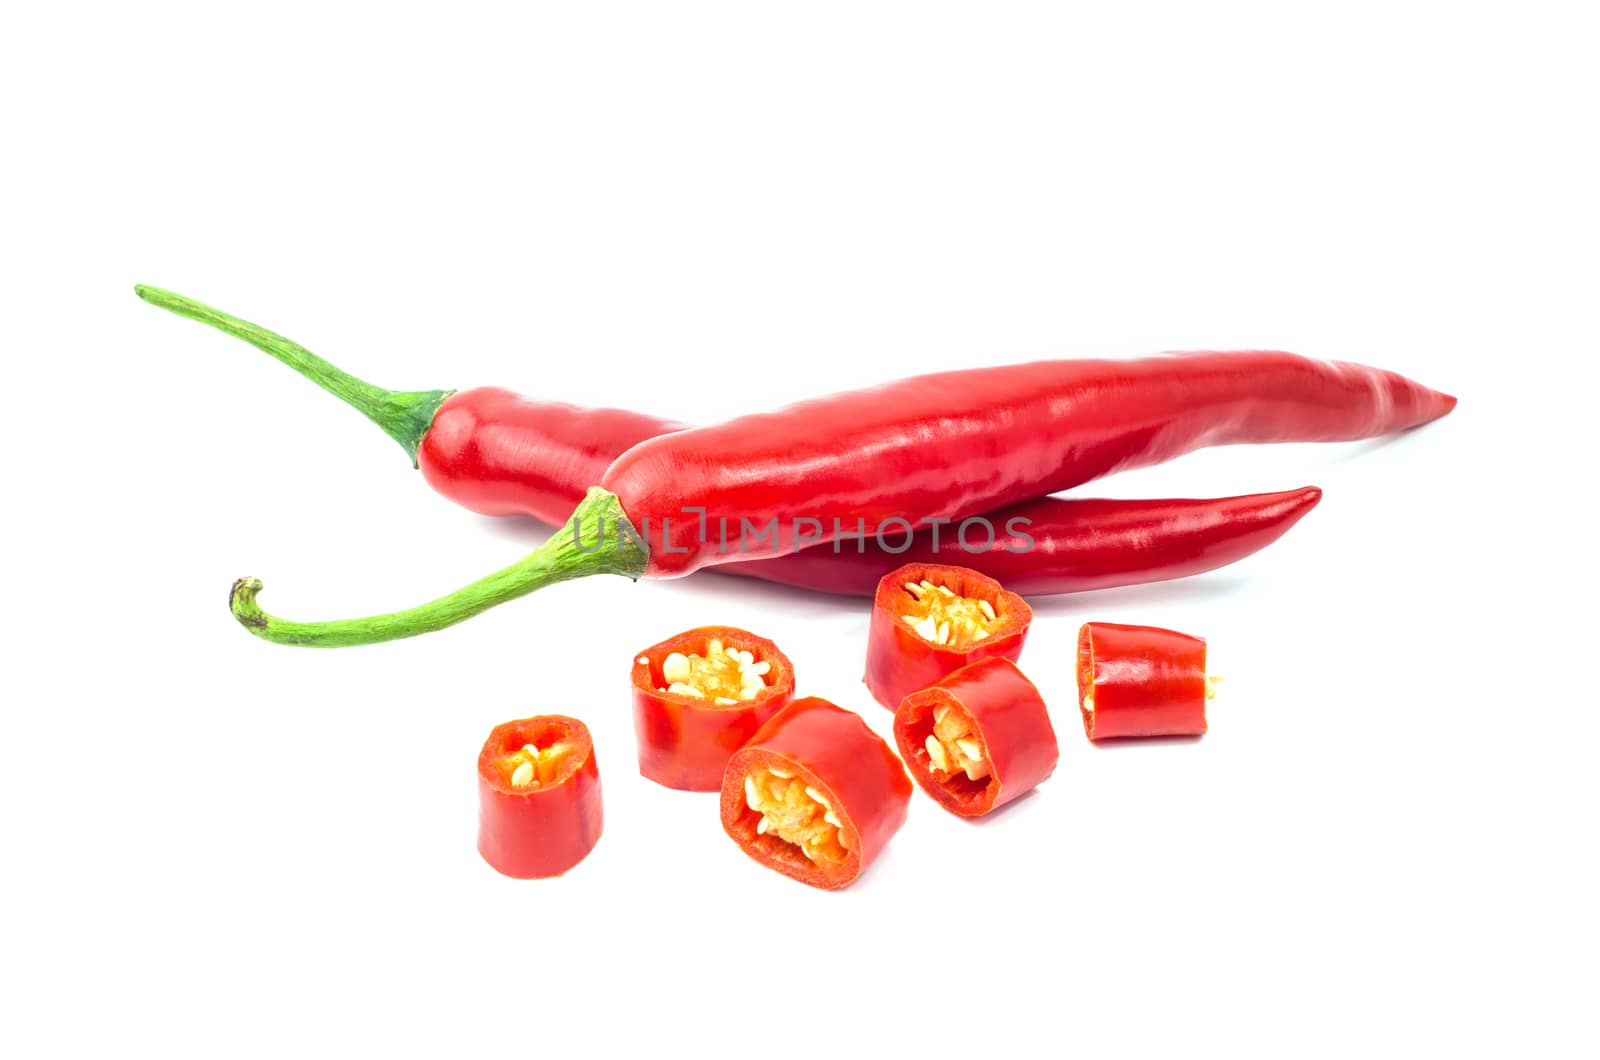 Red chilli pepper isolated on white background.